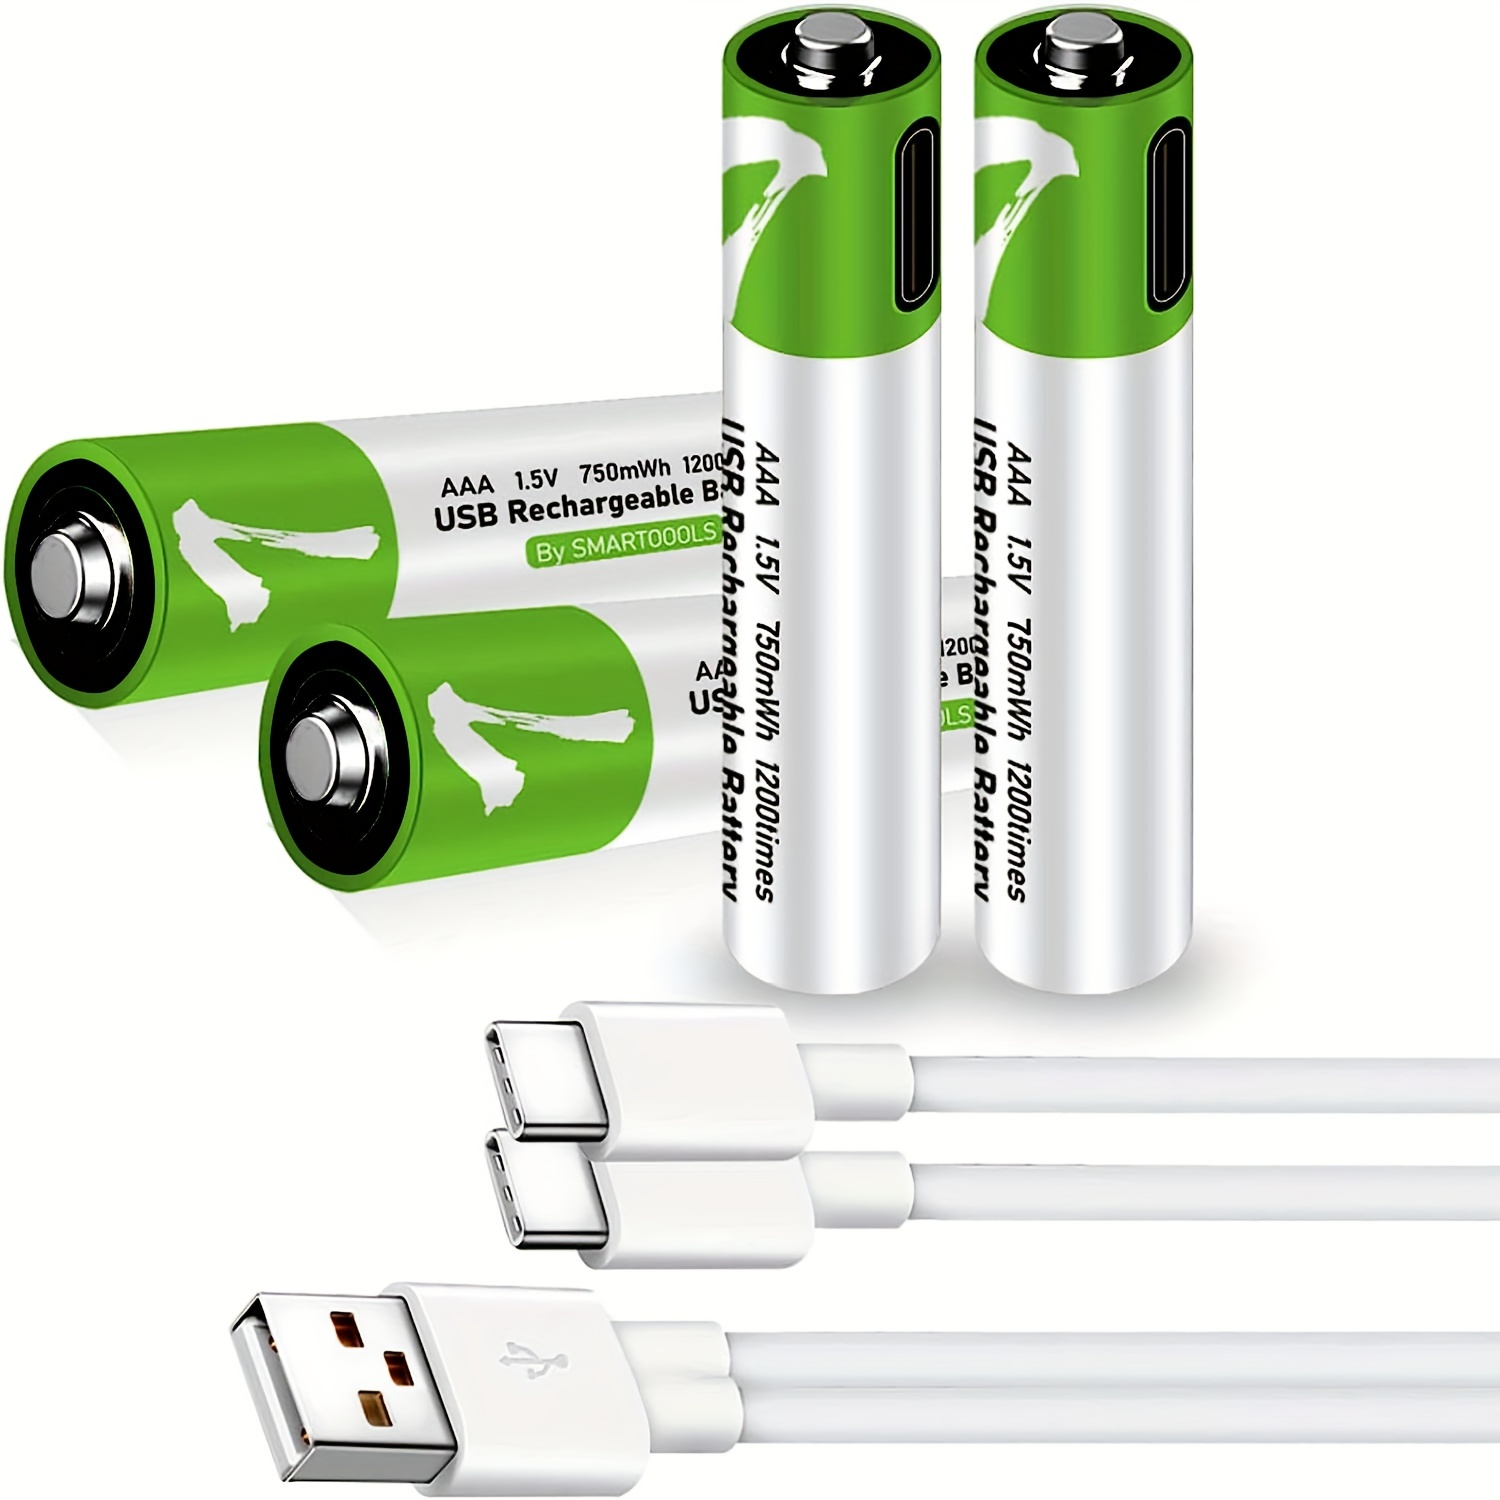 USB Rechargeable AAA Battery, 1.5V / 750mWh Rechargeable Lithium AAA  Batteries, Over 1200 Cycles, 1.5 Hours Fast Charging 